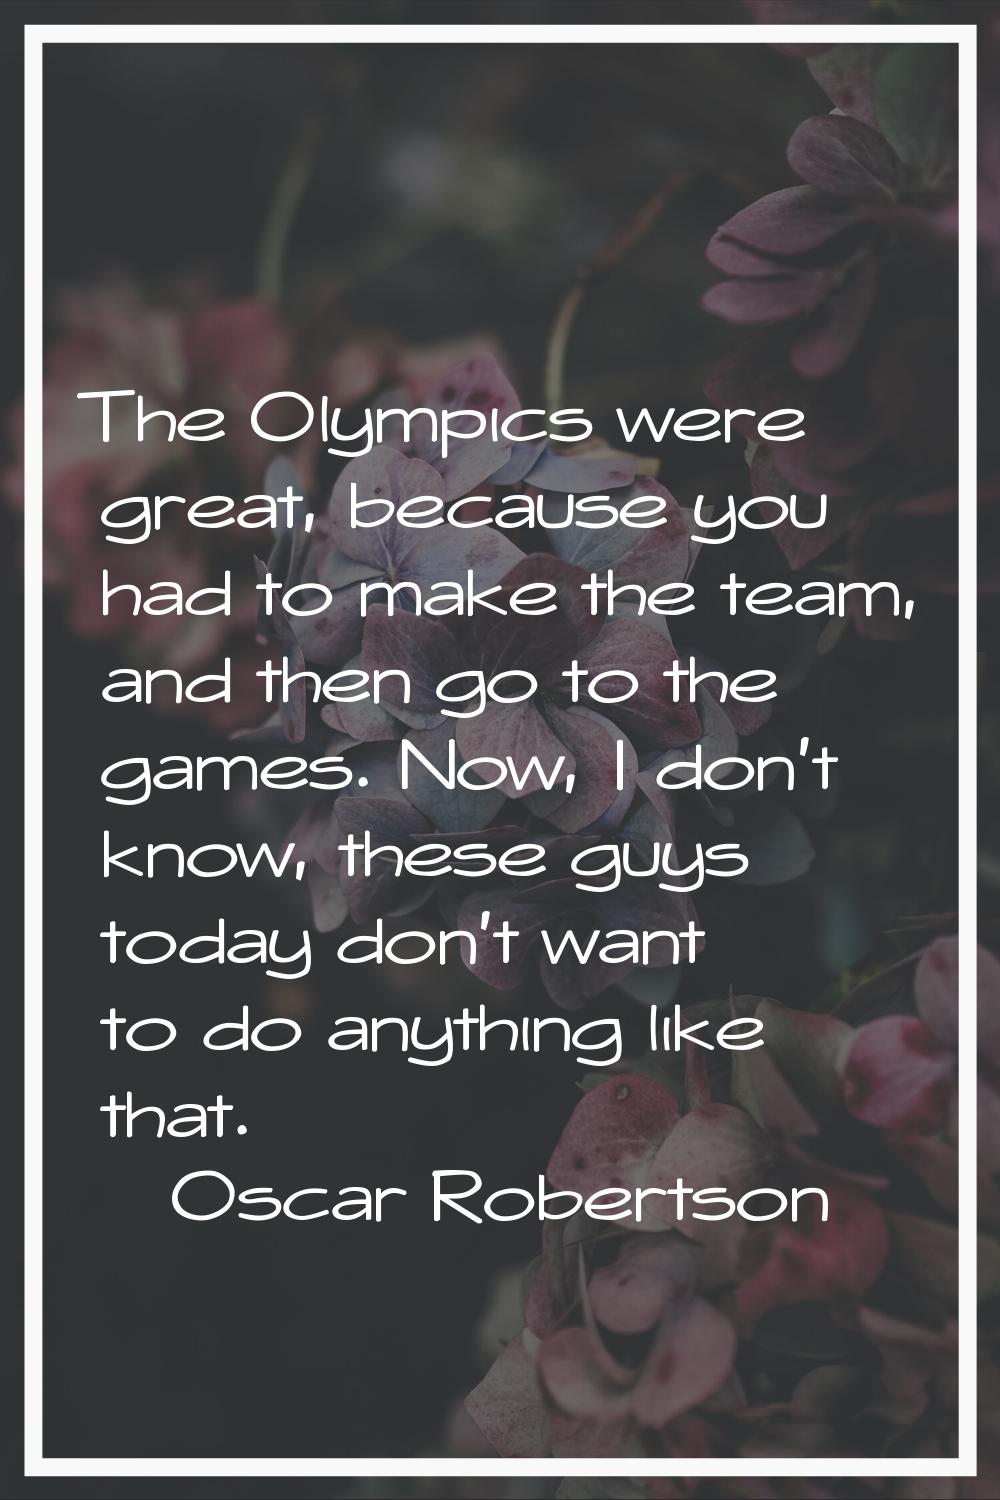 The Olympics were great, because you had to make the team, and then go to the games. Now, I don't k